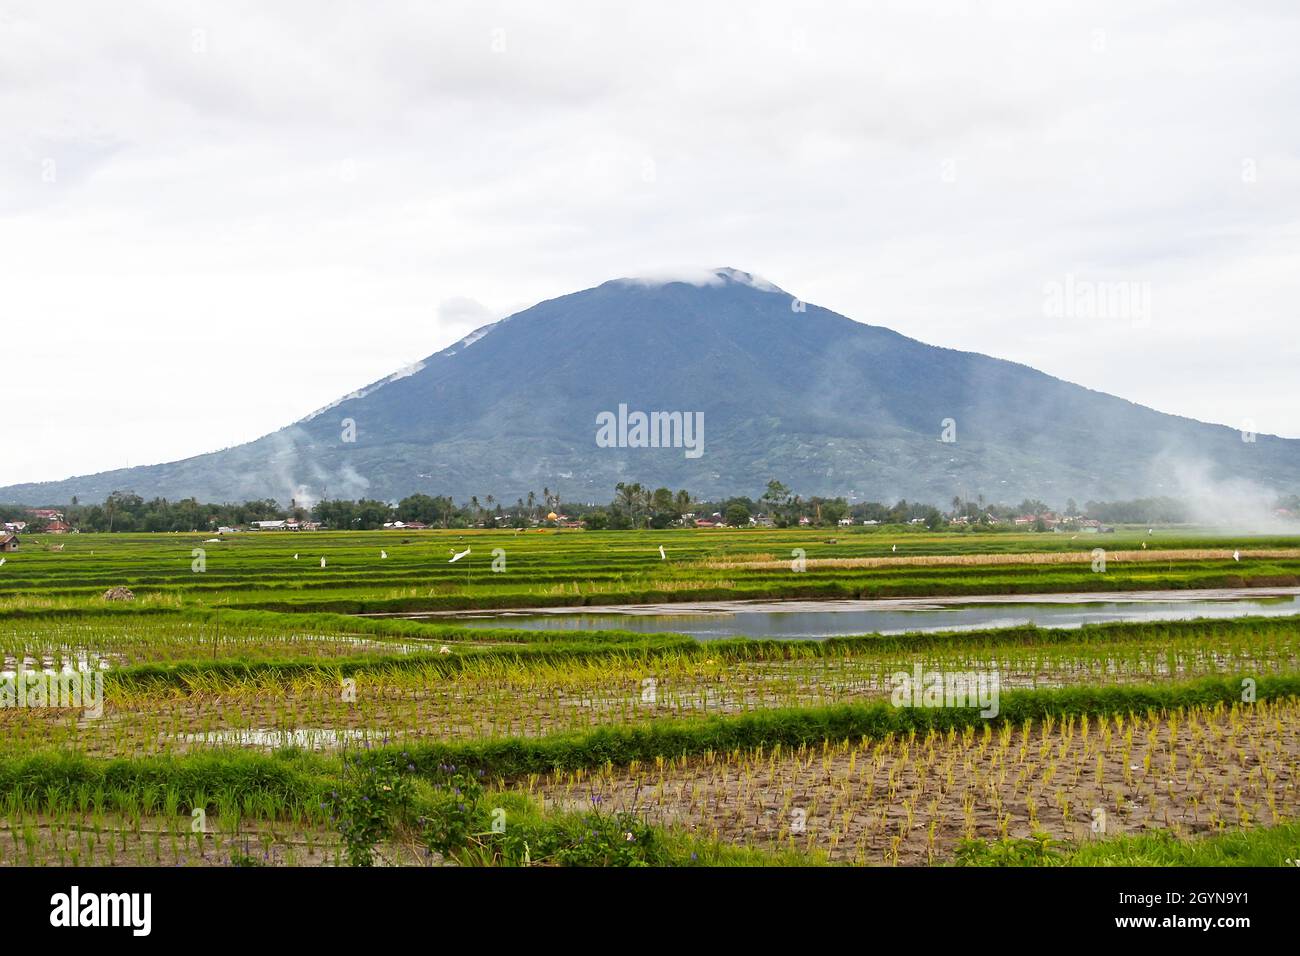 View of Mount Singgalang or Gunung Singgalang with rice fields in the foreground near the town of Bukittinggi, West Sumatra, Indonesia. Stock Photo